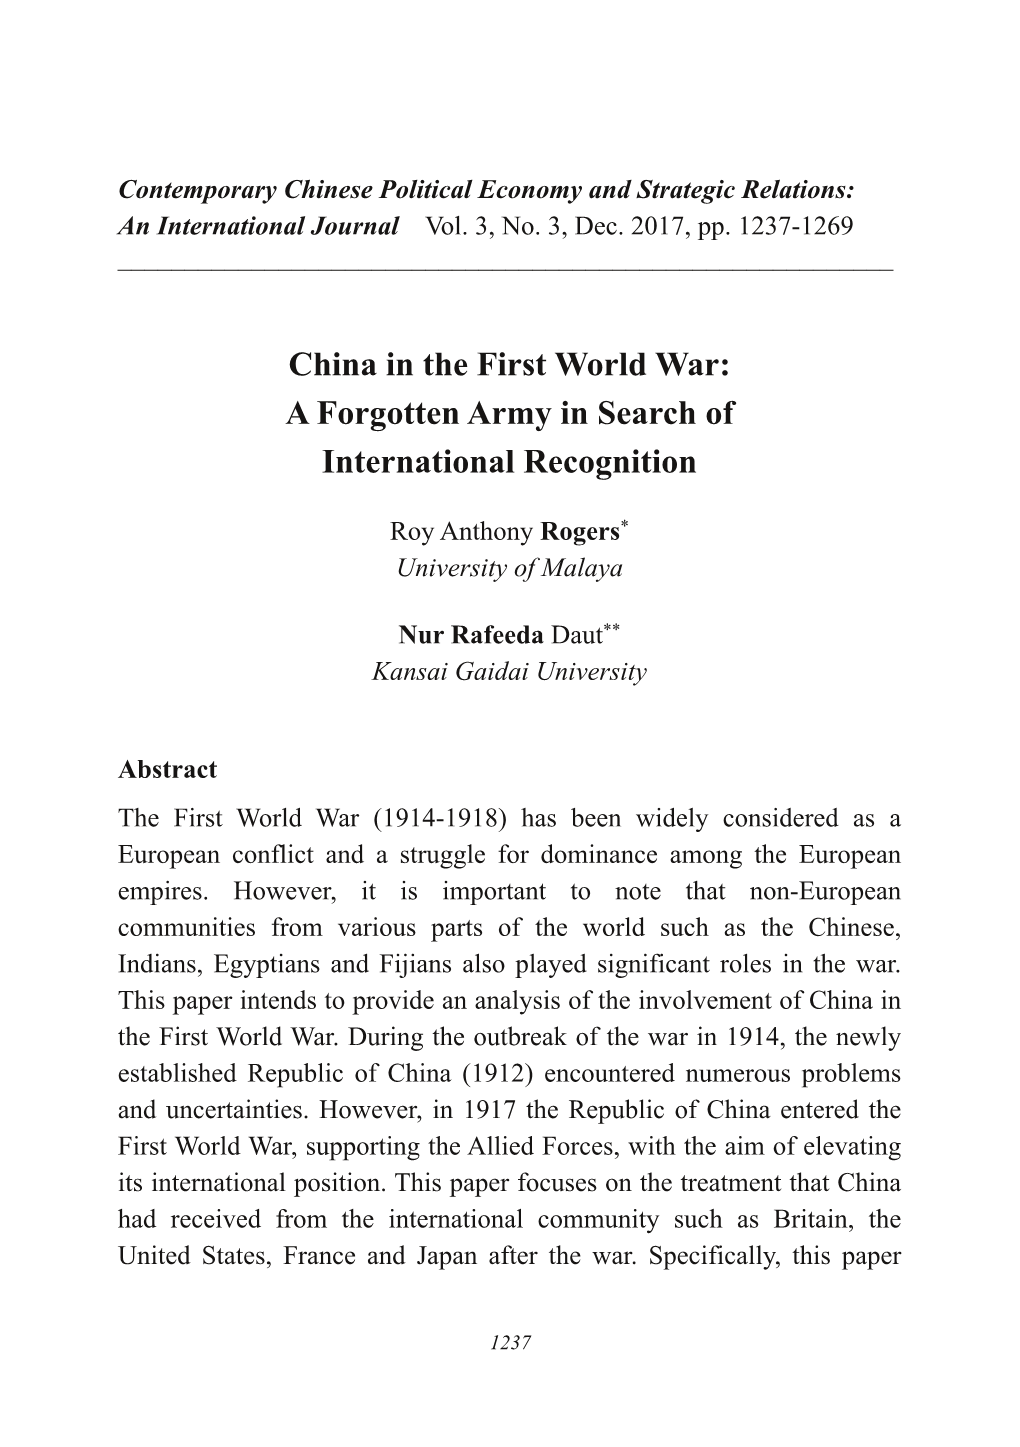 China in the First World War: a Forgotten Army in Search of International Recognition